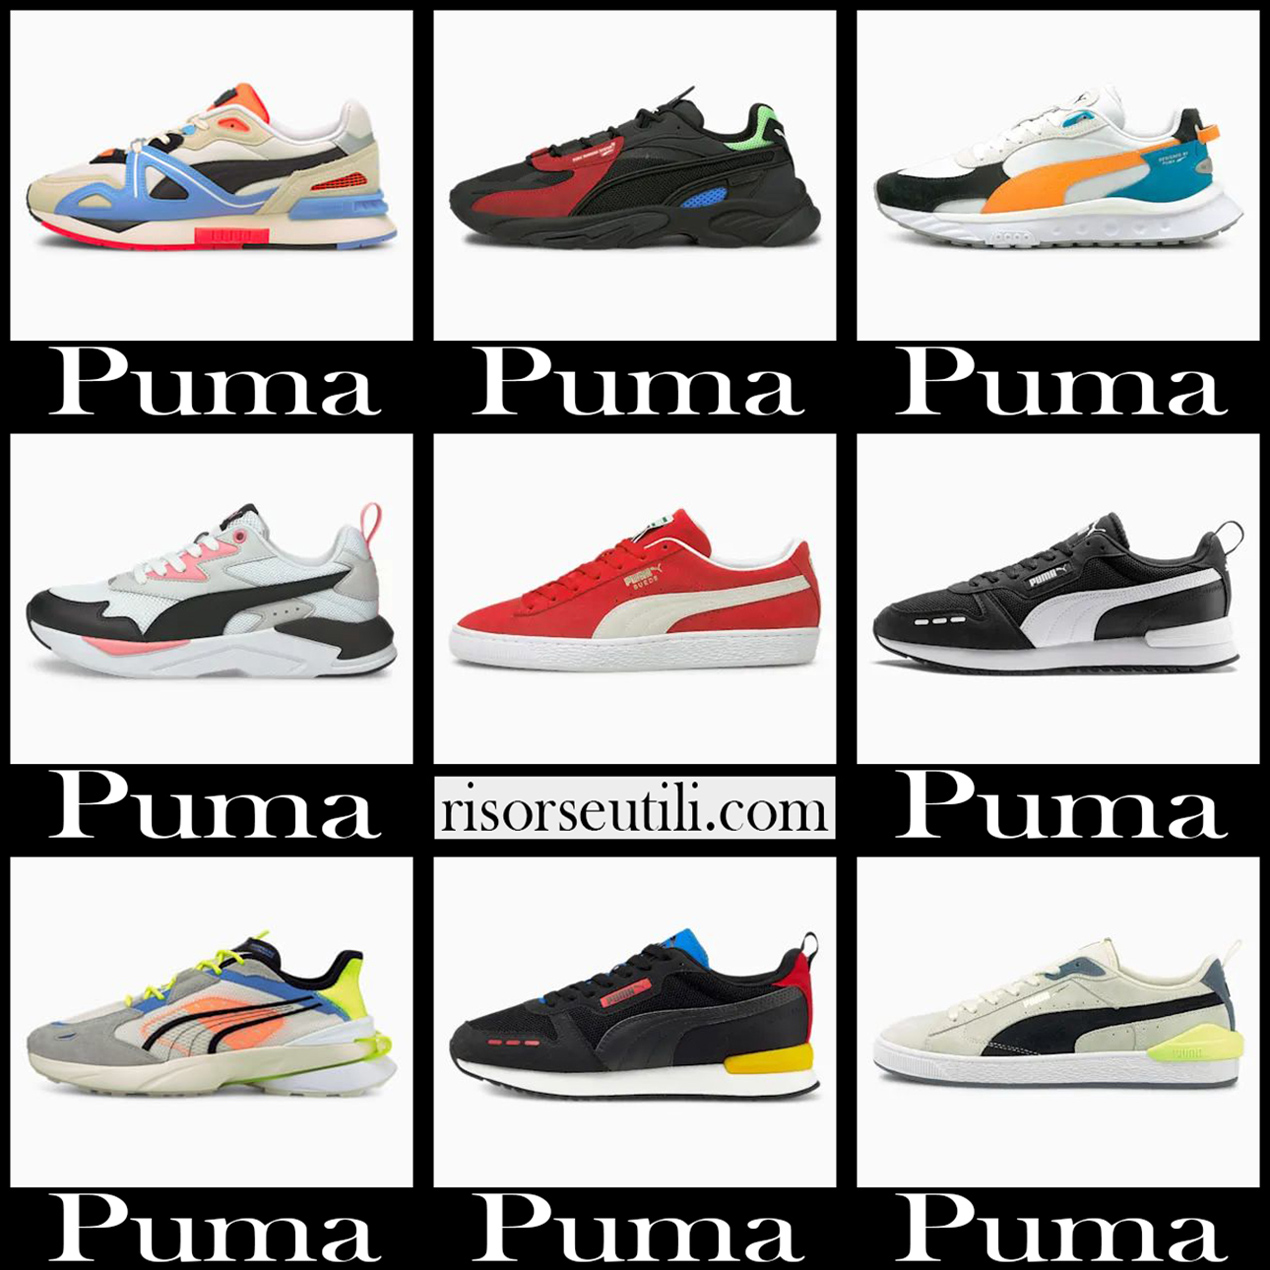 New arrivals Puma sneakers 2022 women's shoes